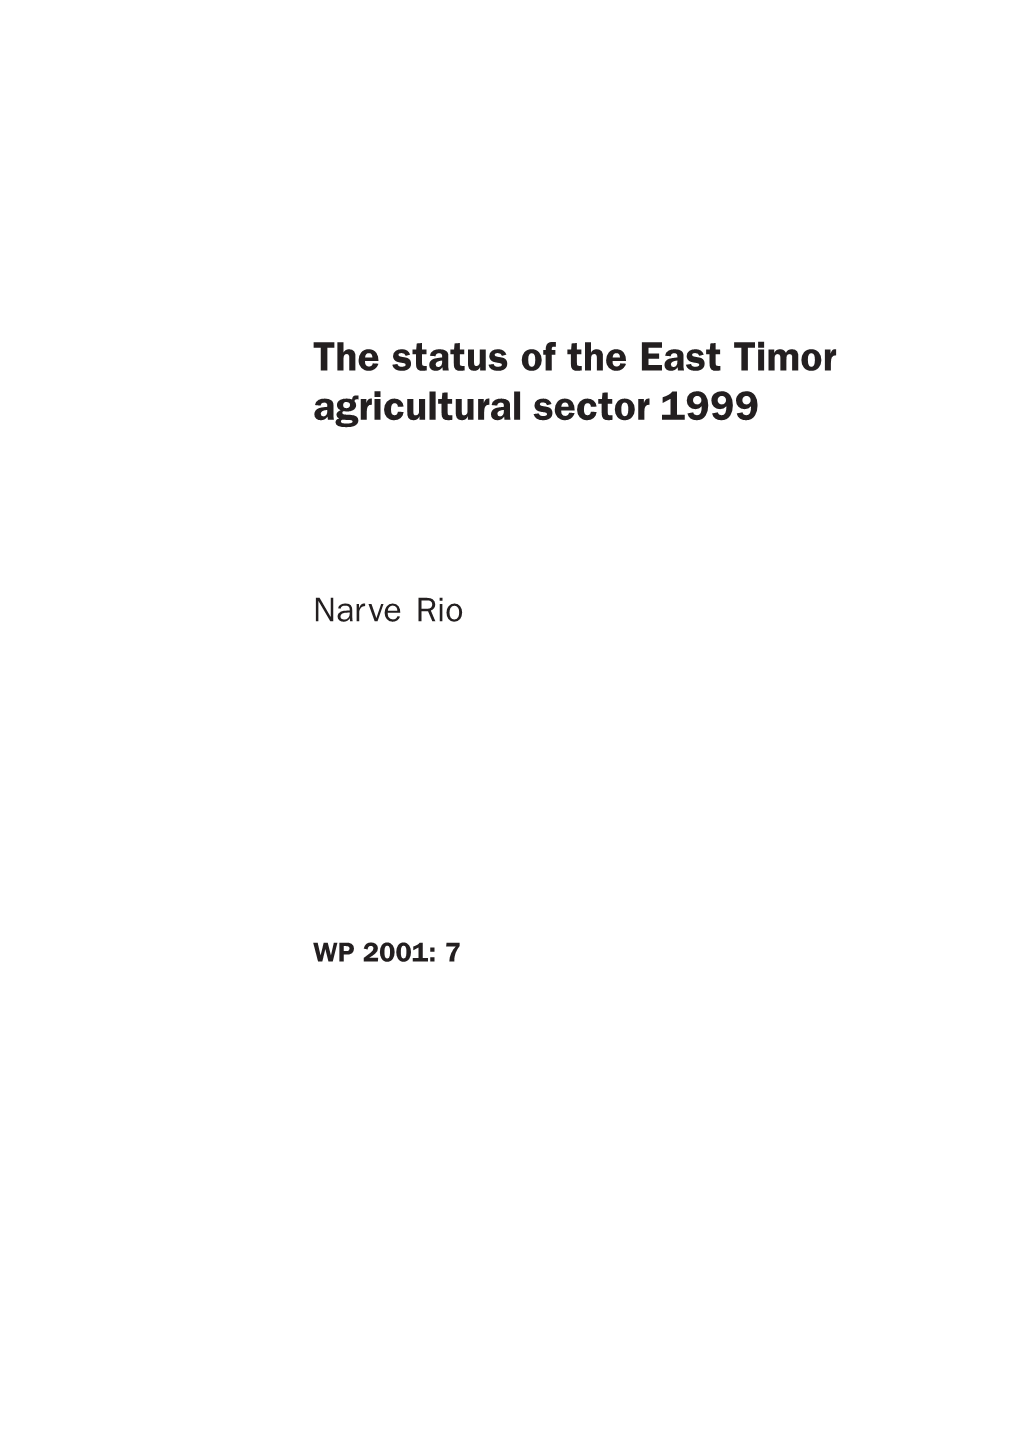 The Status of the East Timor Agricultural Sector 1999